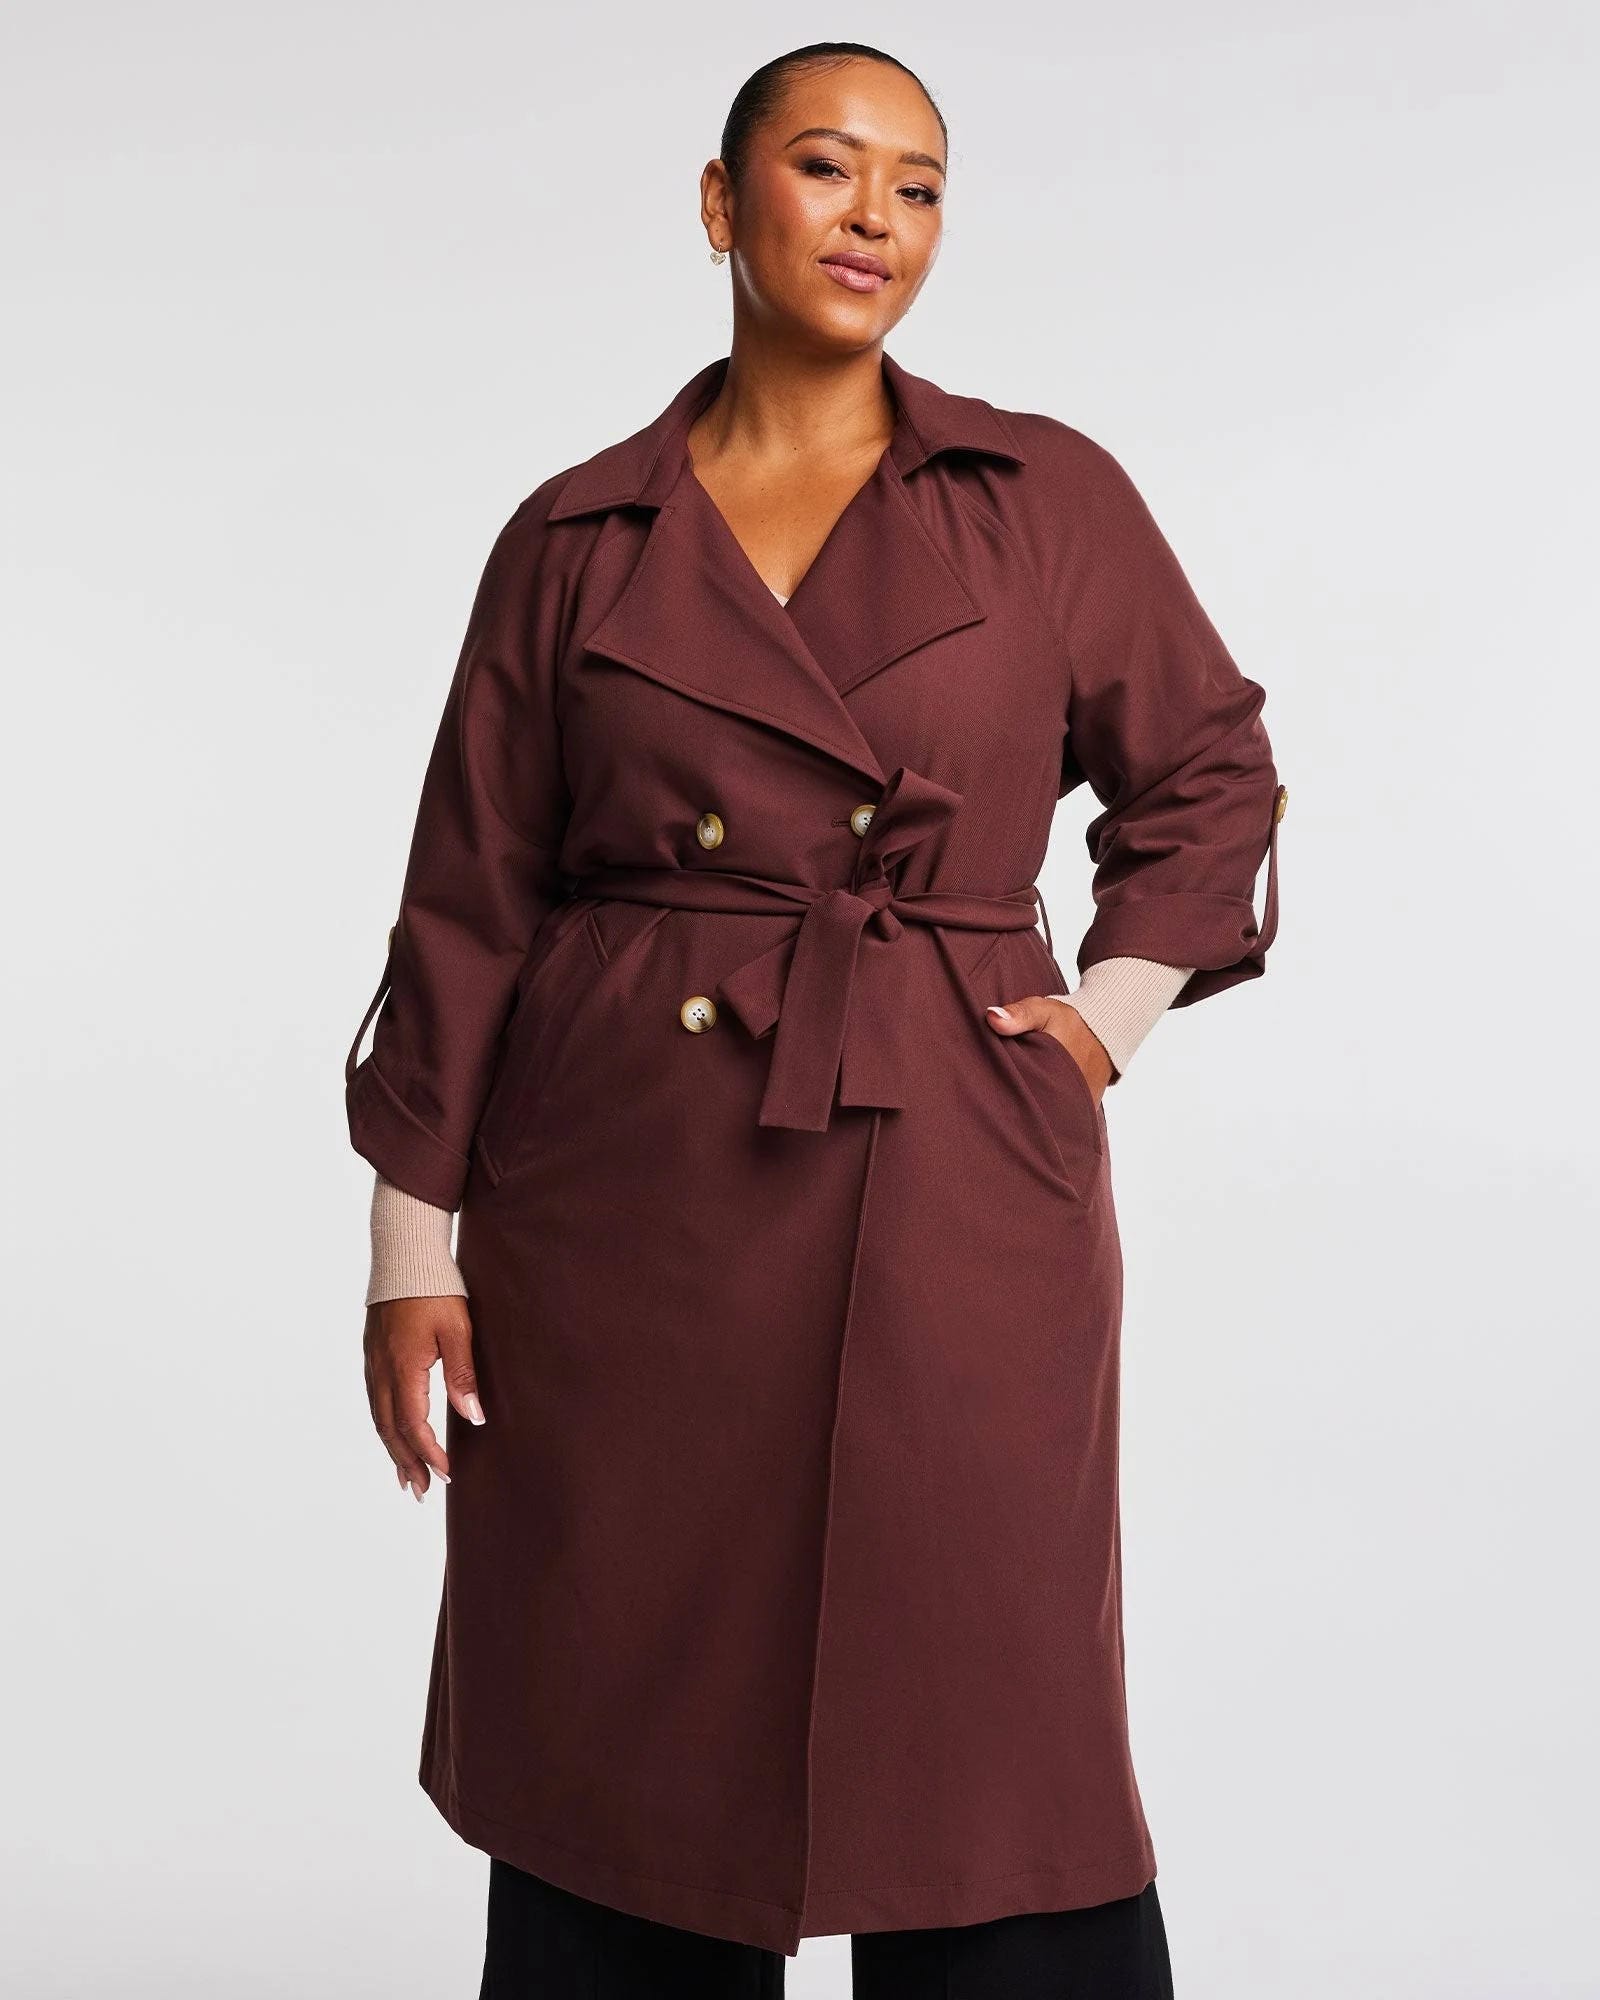 Noella Chocolate Brown Trench Coat: Plus-Size with 20W | Image